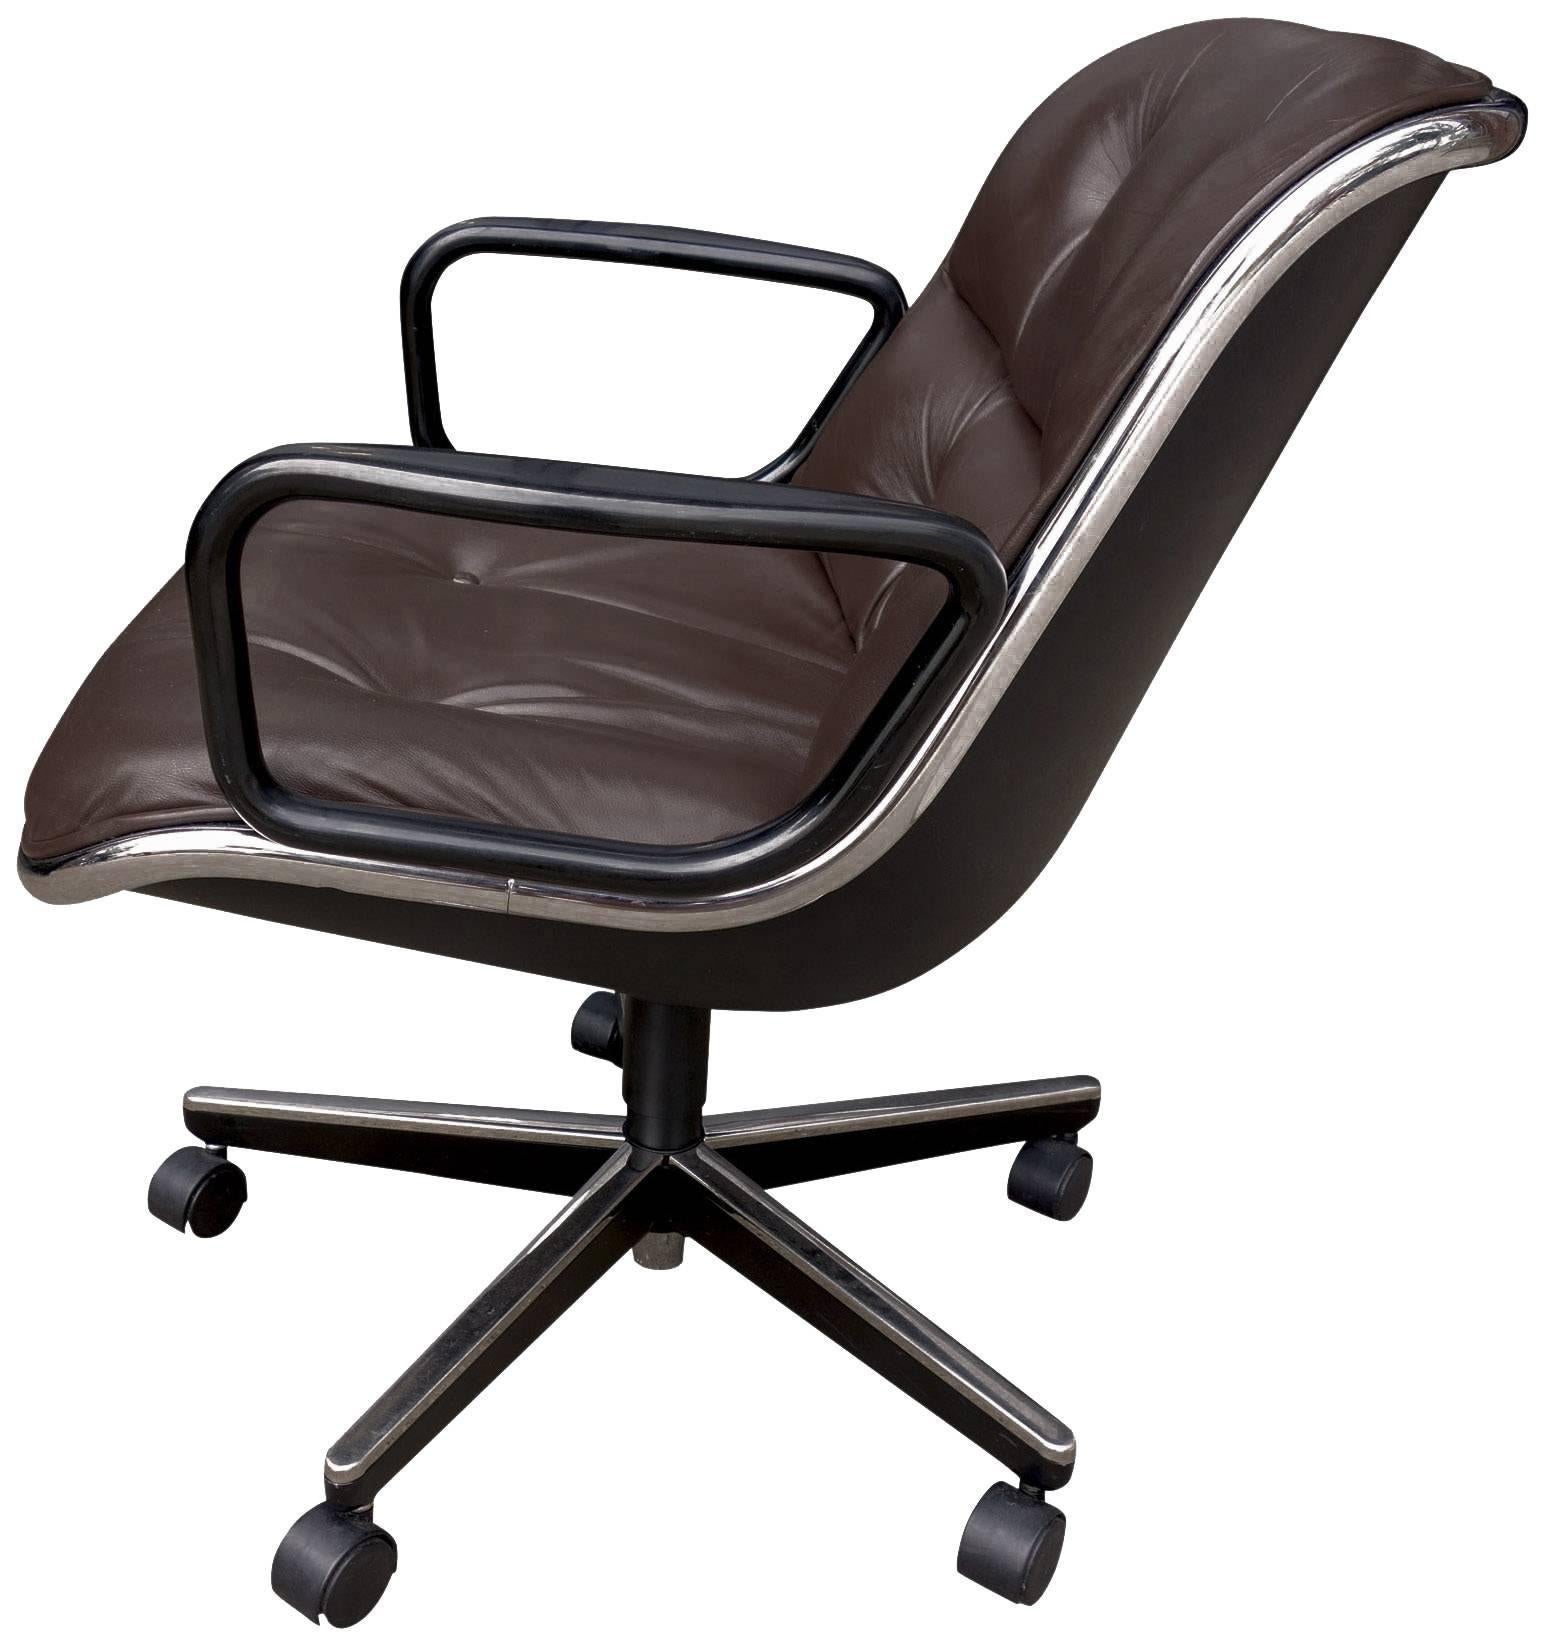 For your consideration is Charles Pollock for Knoll office chairs in Dark Coffee Bean Leather. Pollock chairs are icons of Mid-Century modern design. Pollock revolutionized office seating with the introduction of this chair in the 1960s. The chair